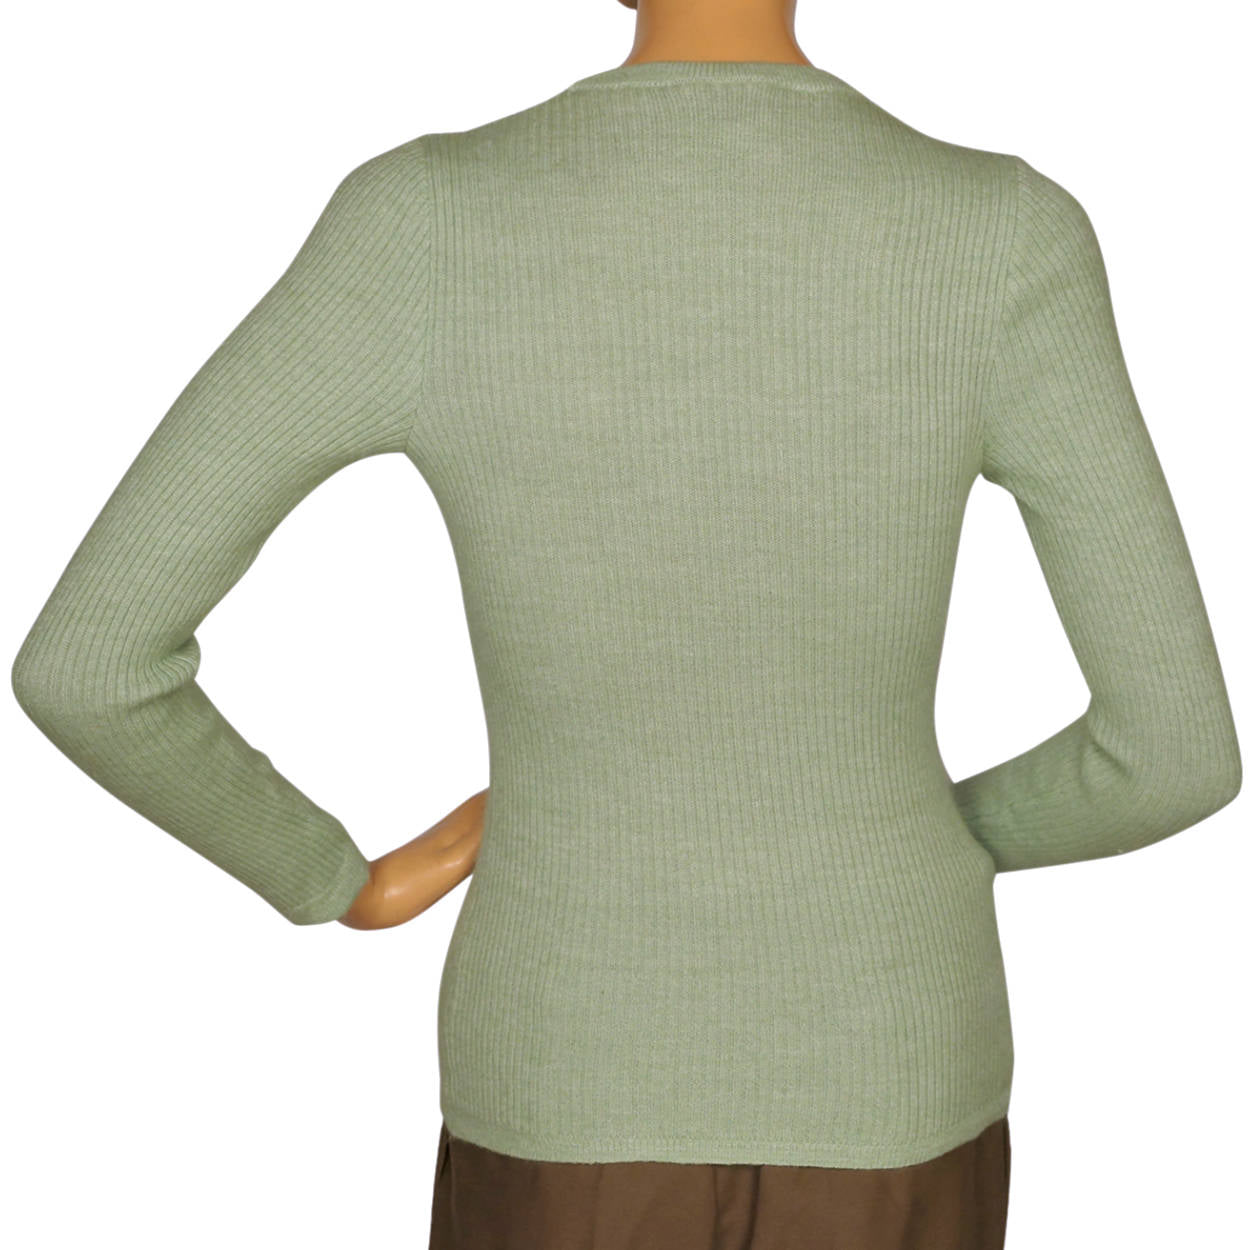 Vintage 1970s Courreges Paris Sweater Top Green Ribbed Knit with Logo ...